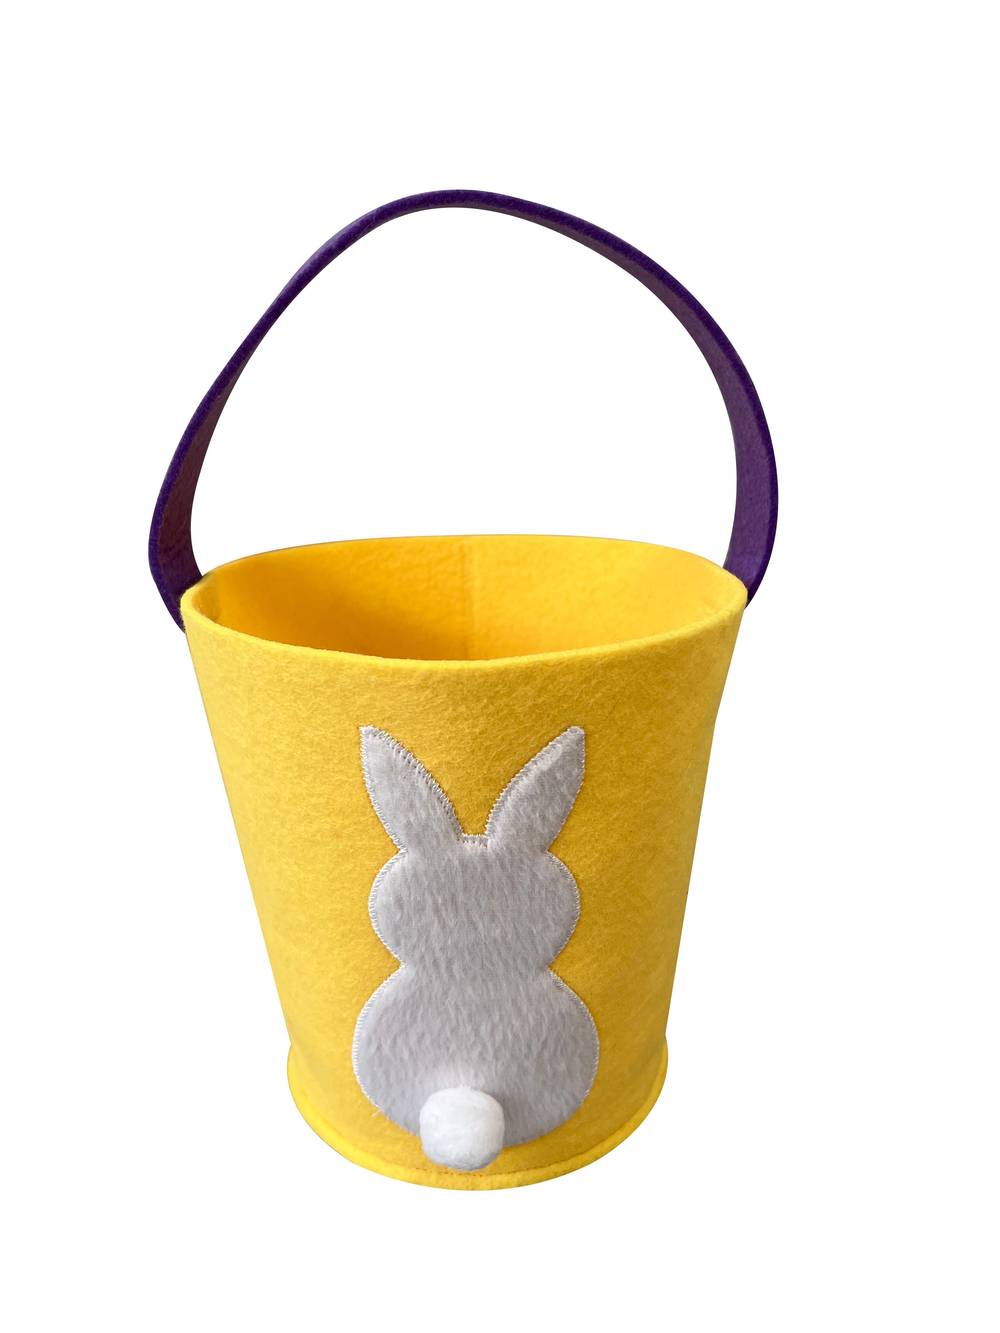 Cottondale Fabric Easter Bunny Basket, Yellow